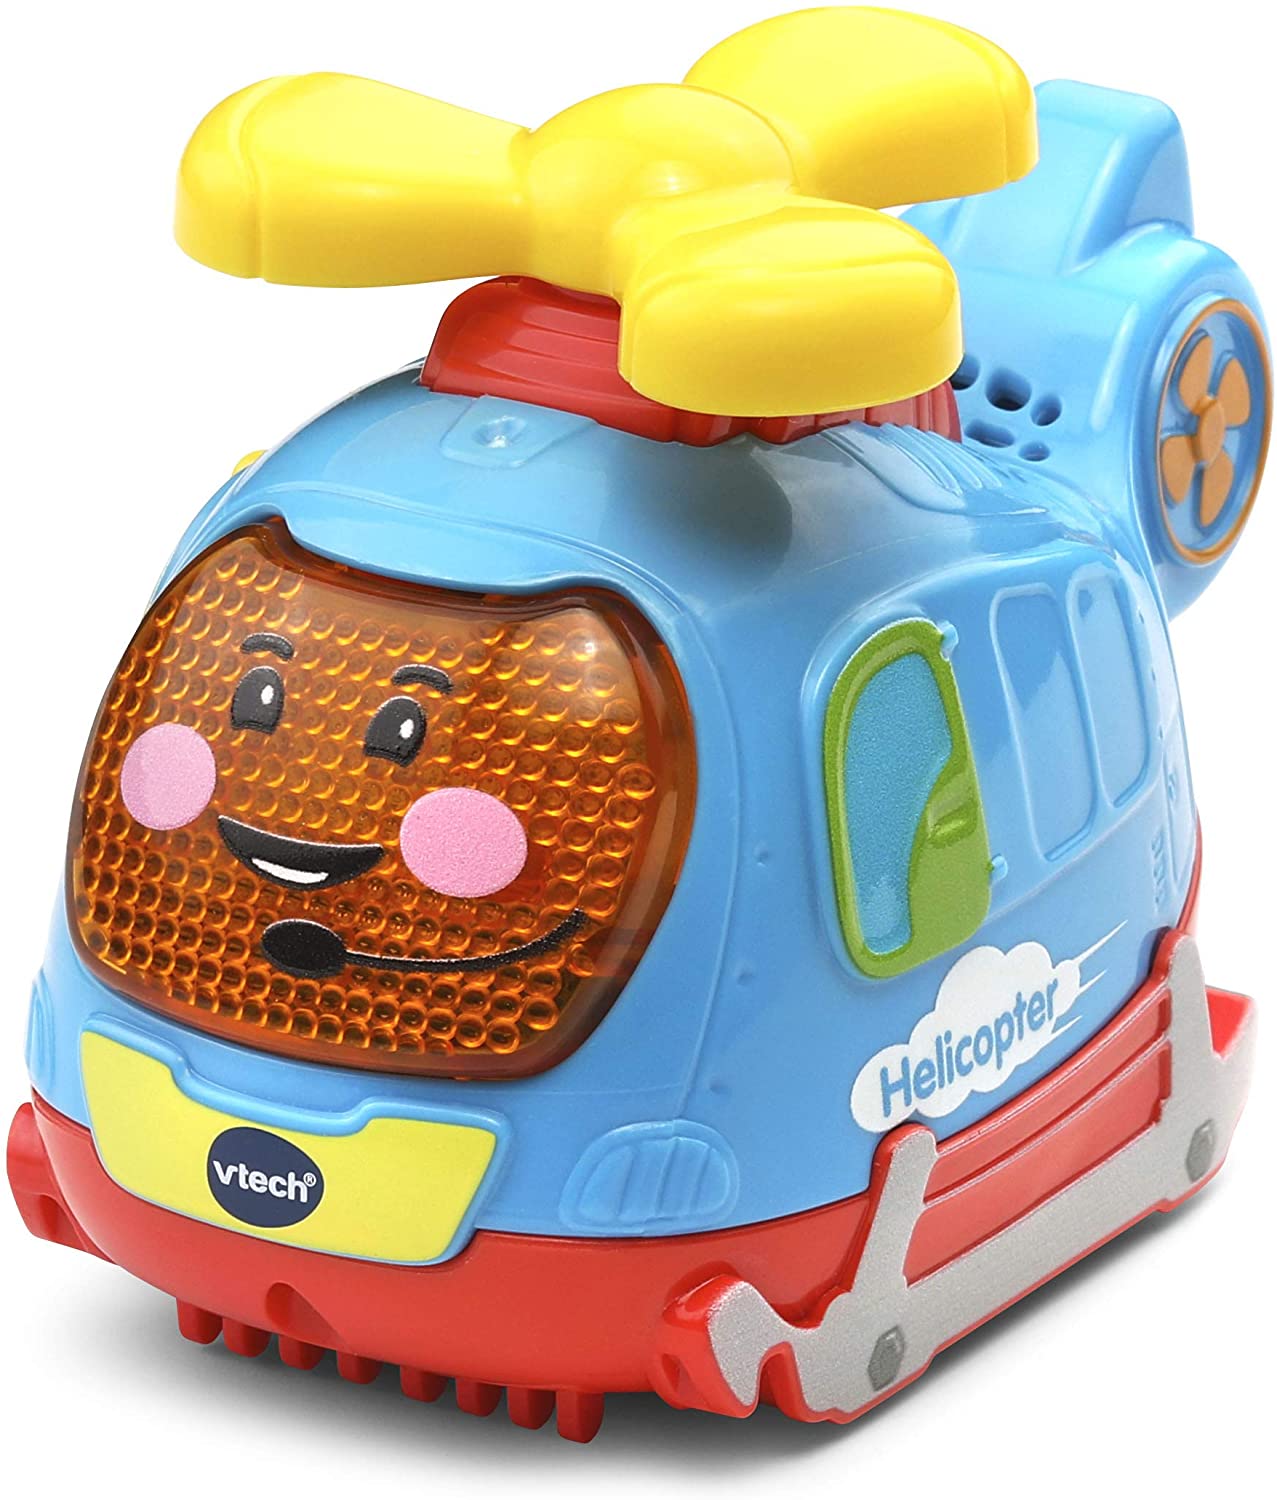 Vtech Toot Toot Helicopter (80-516803)